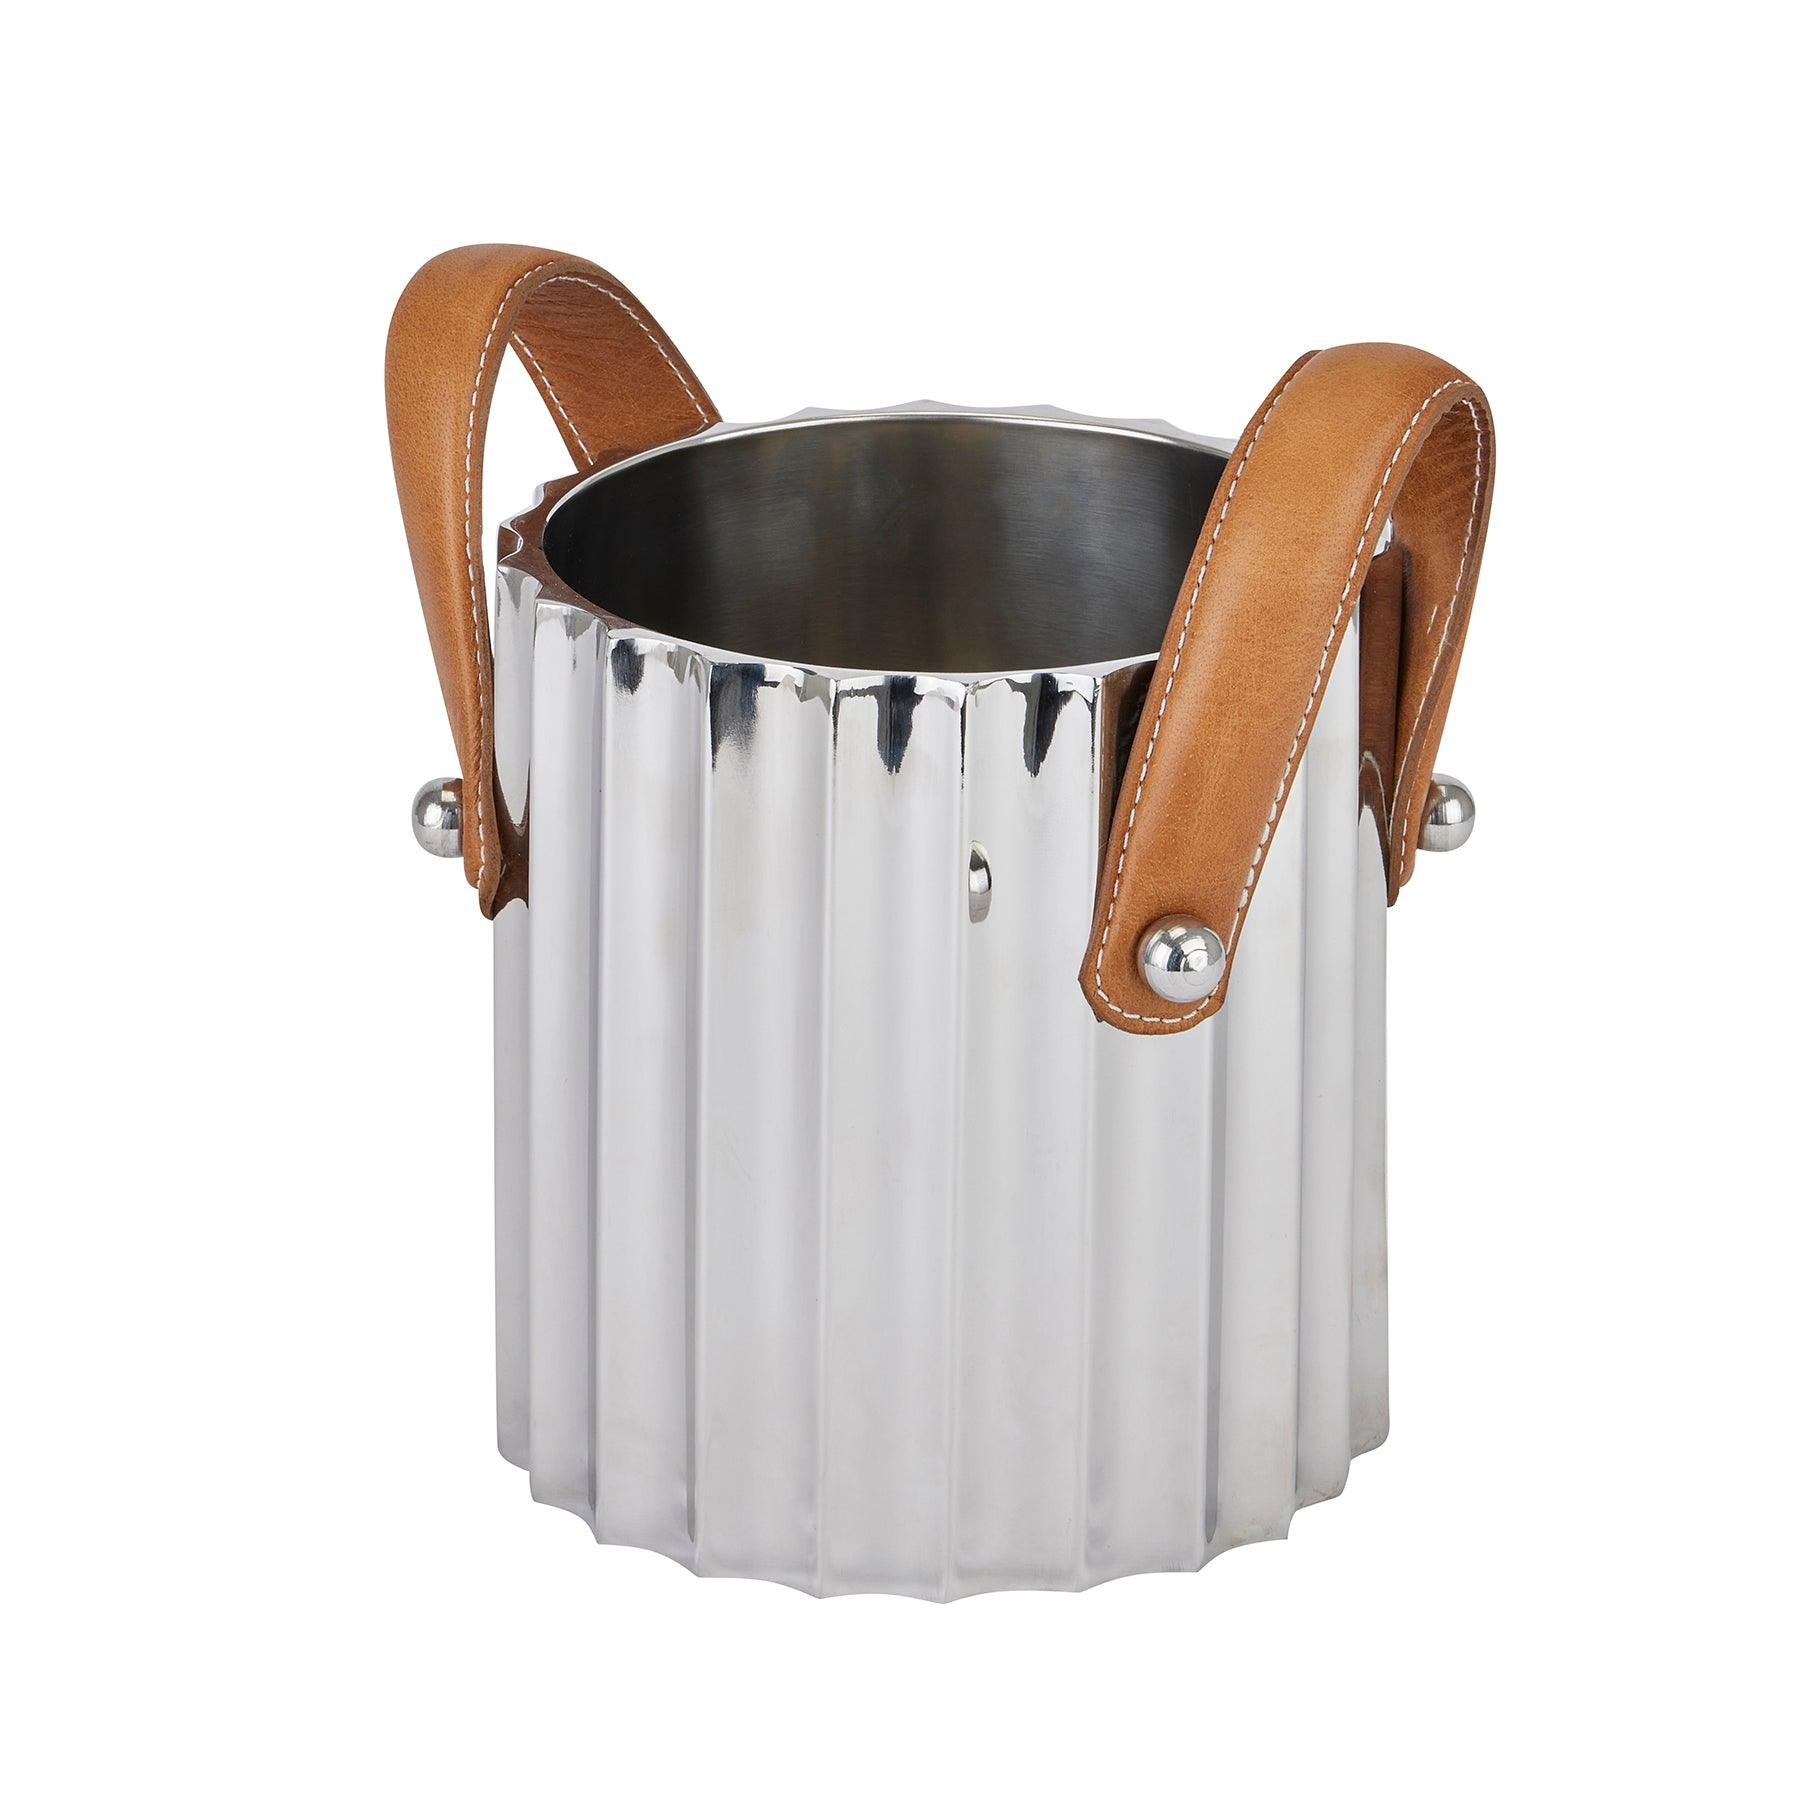 View Silver Fluted Leather Handled Single Champagne Cooler information